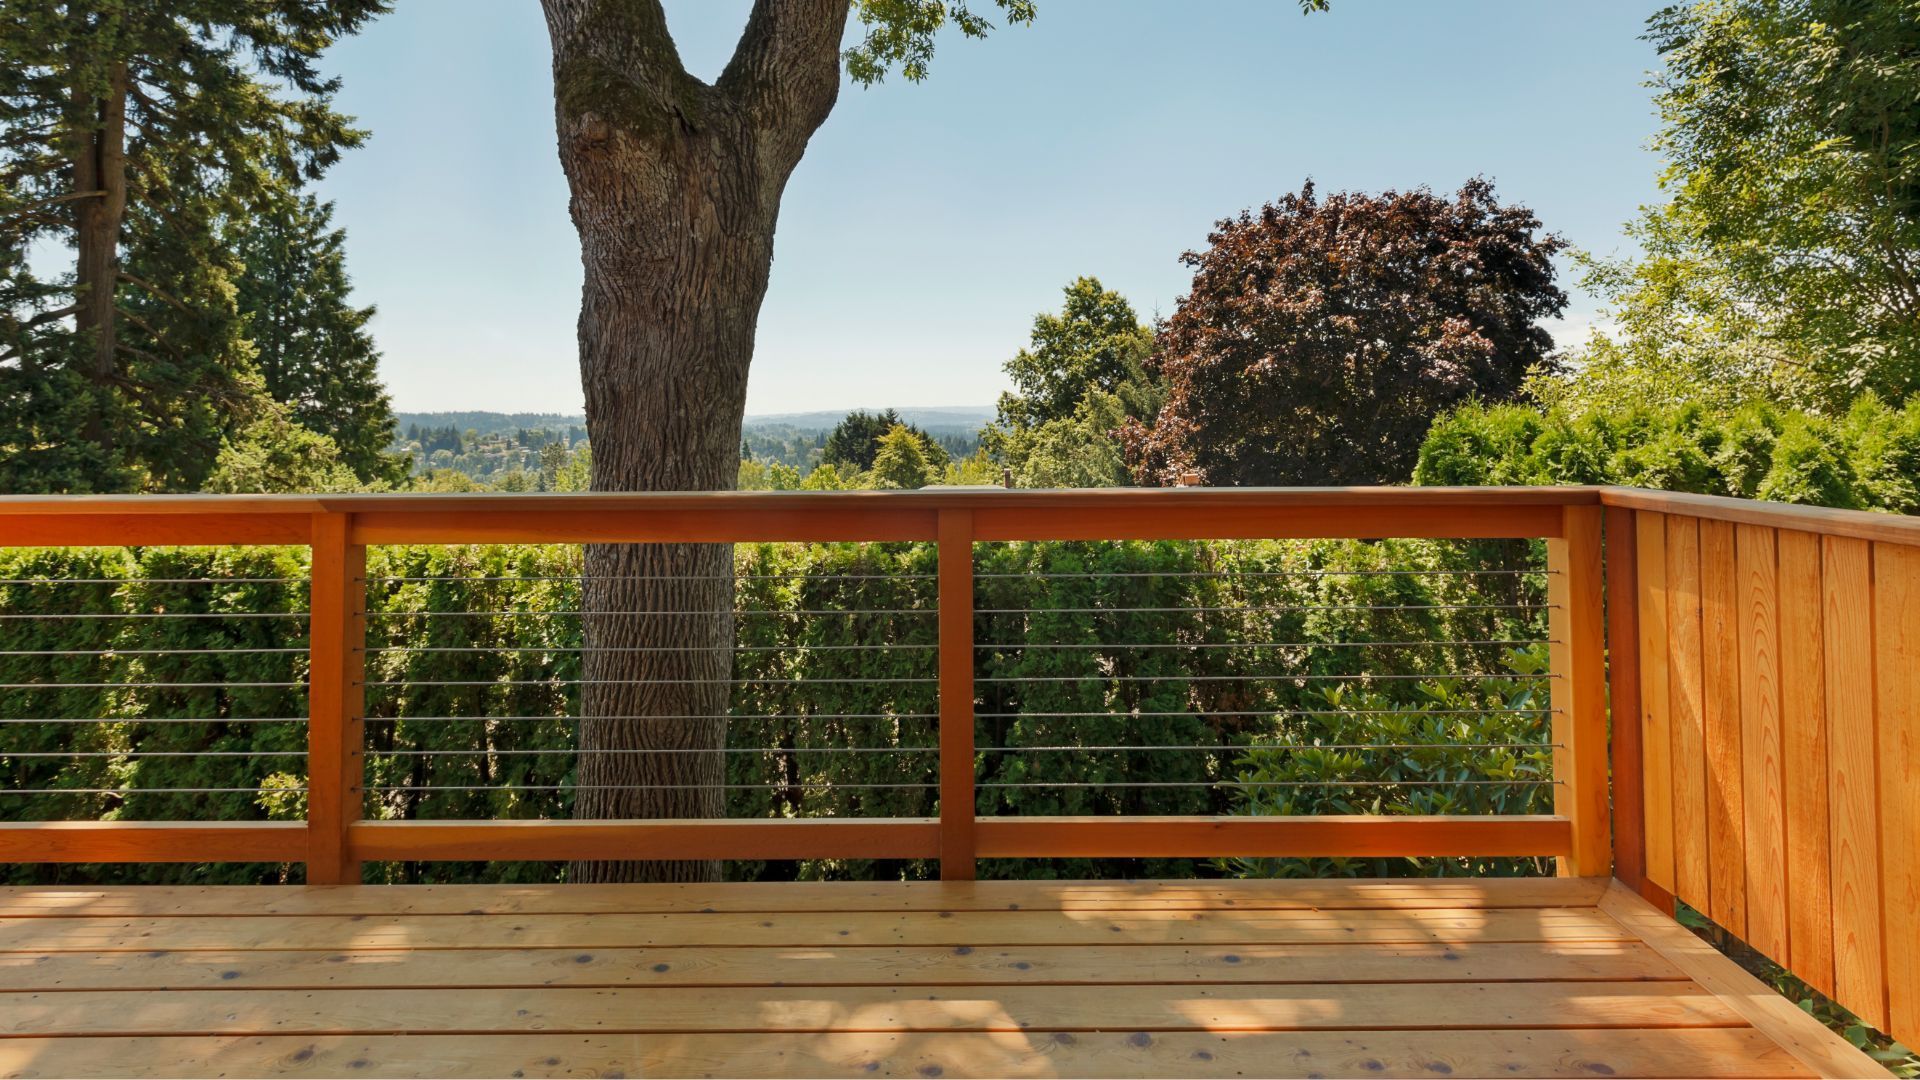 Wooden deck with orange railing overlooking lush greenery and hills in Salinas, CA.